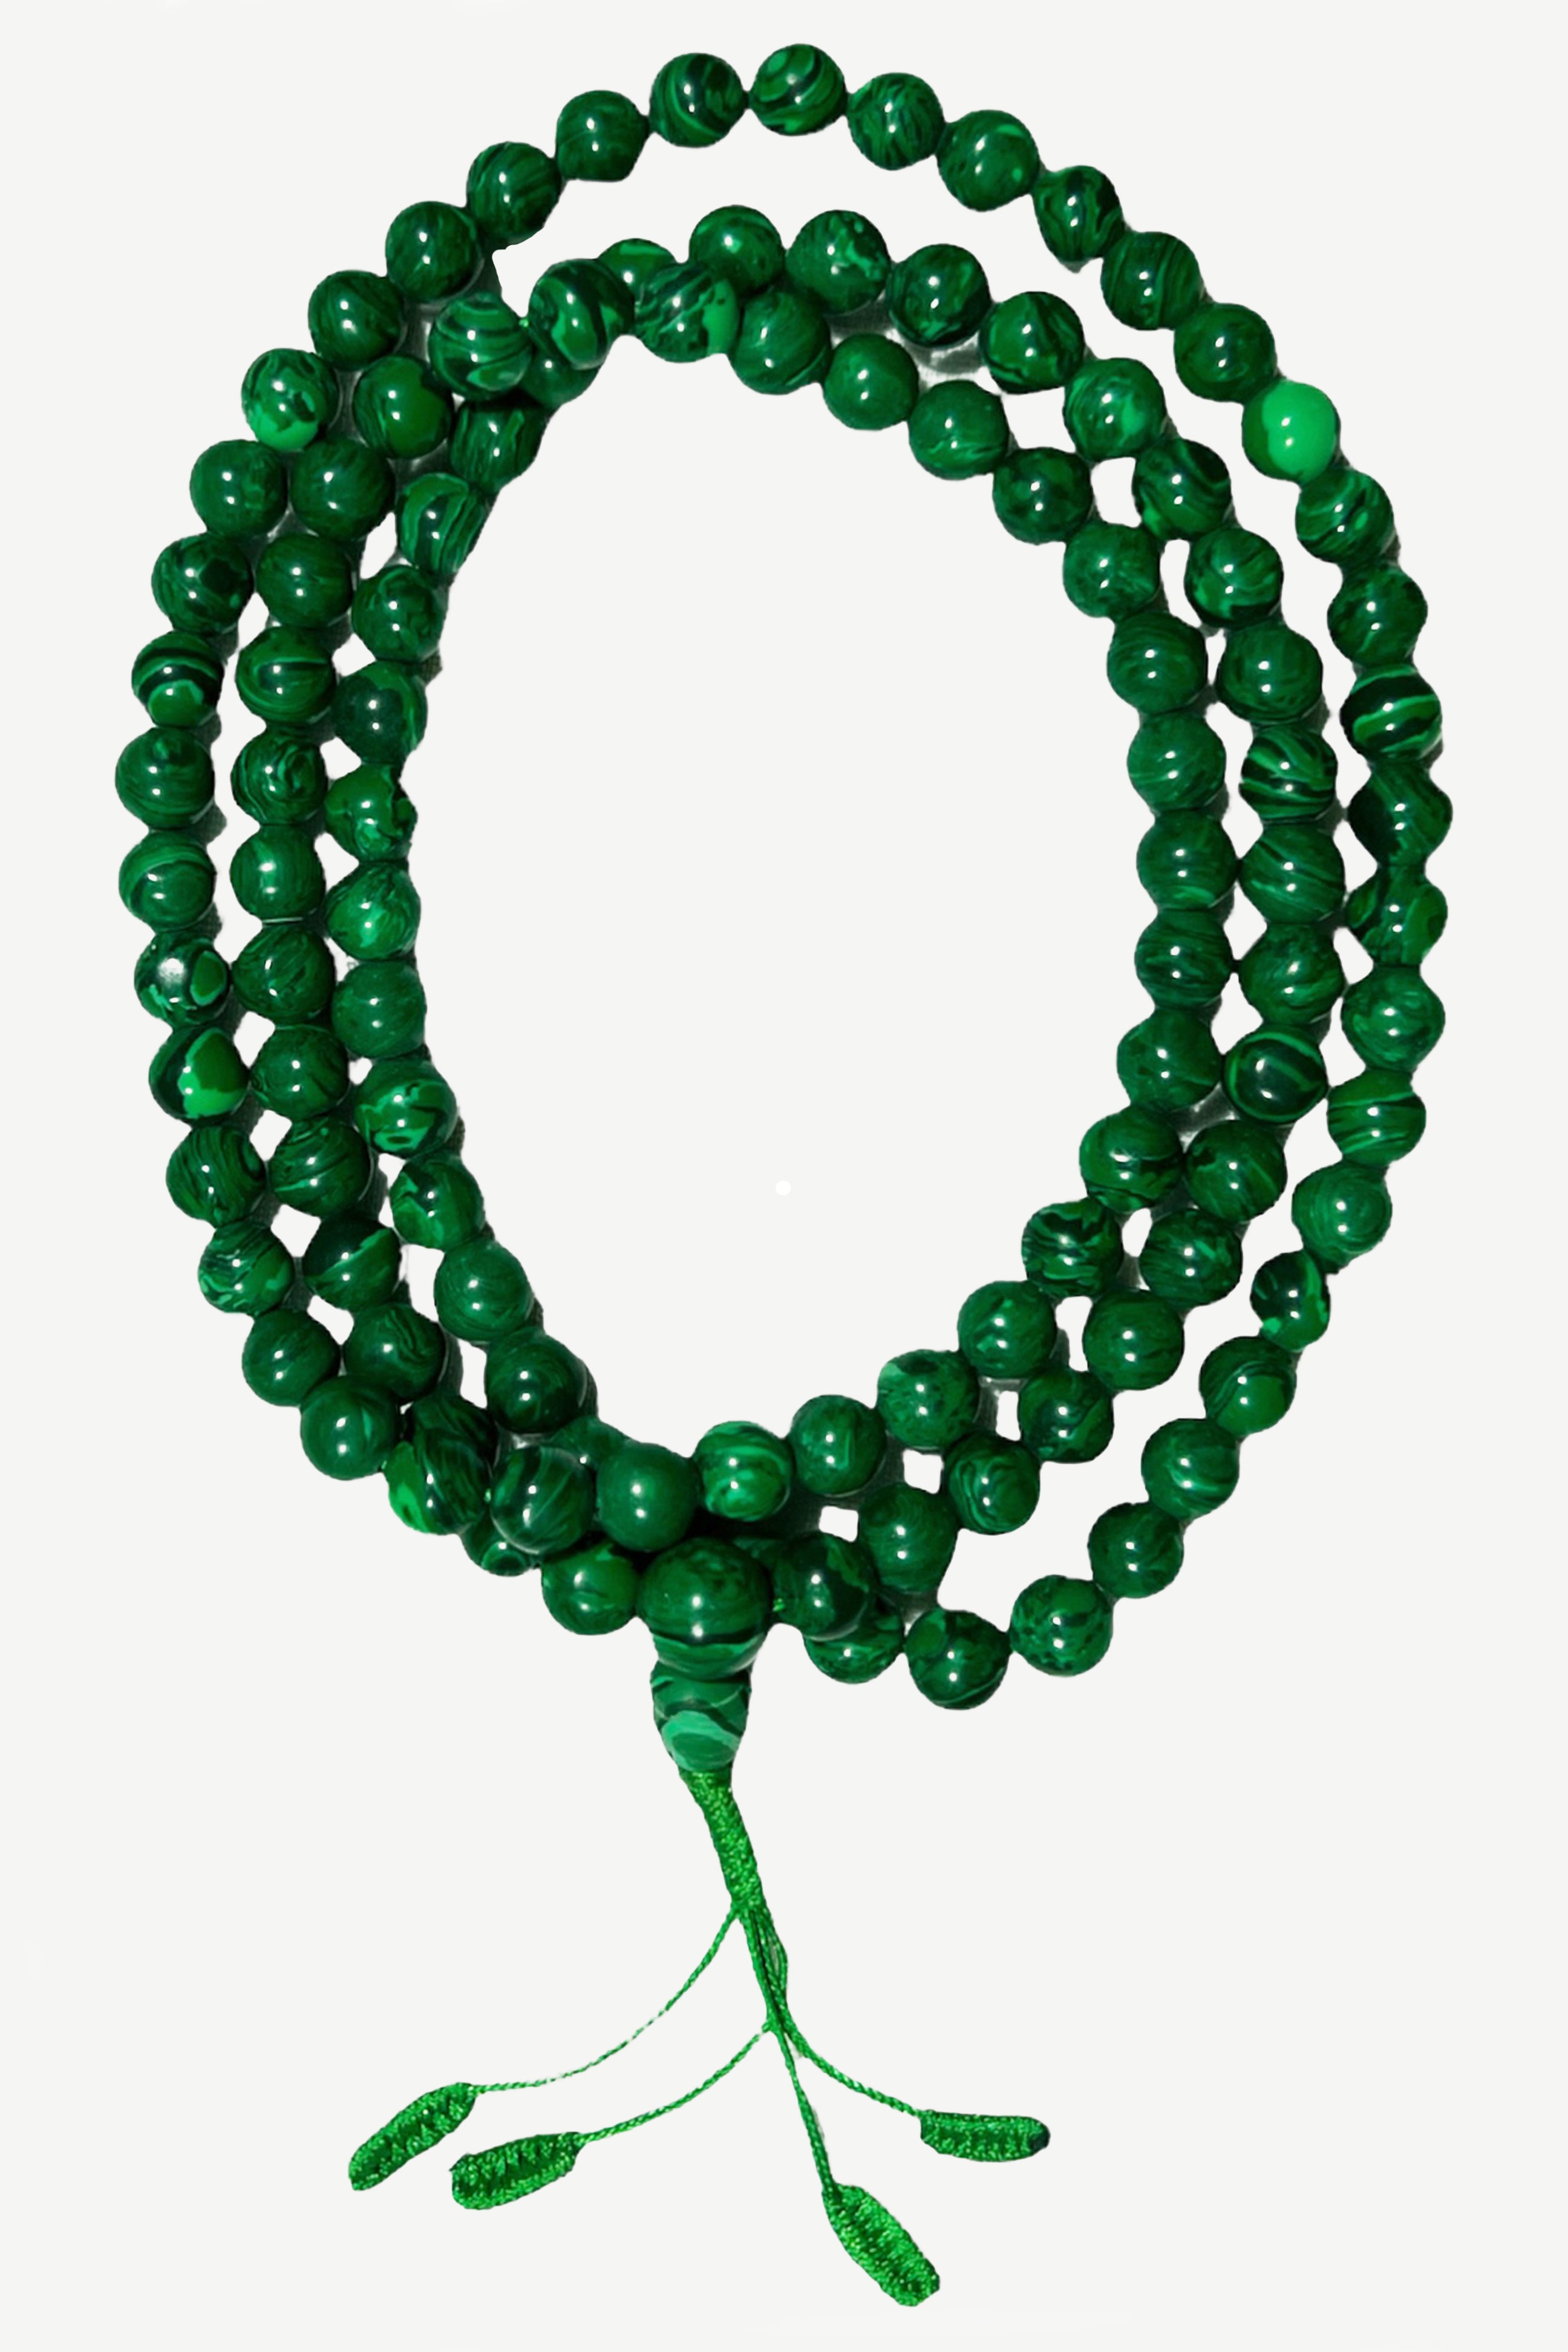 Genuine 108 Monk Beads Necklace